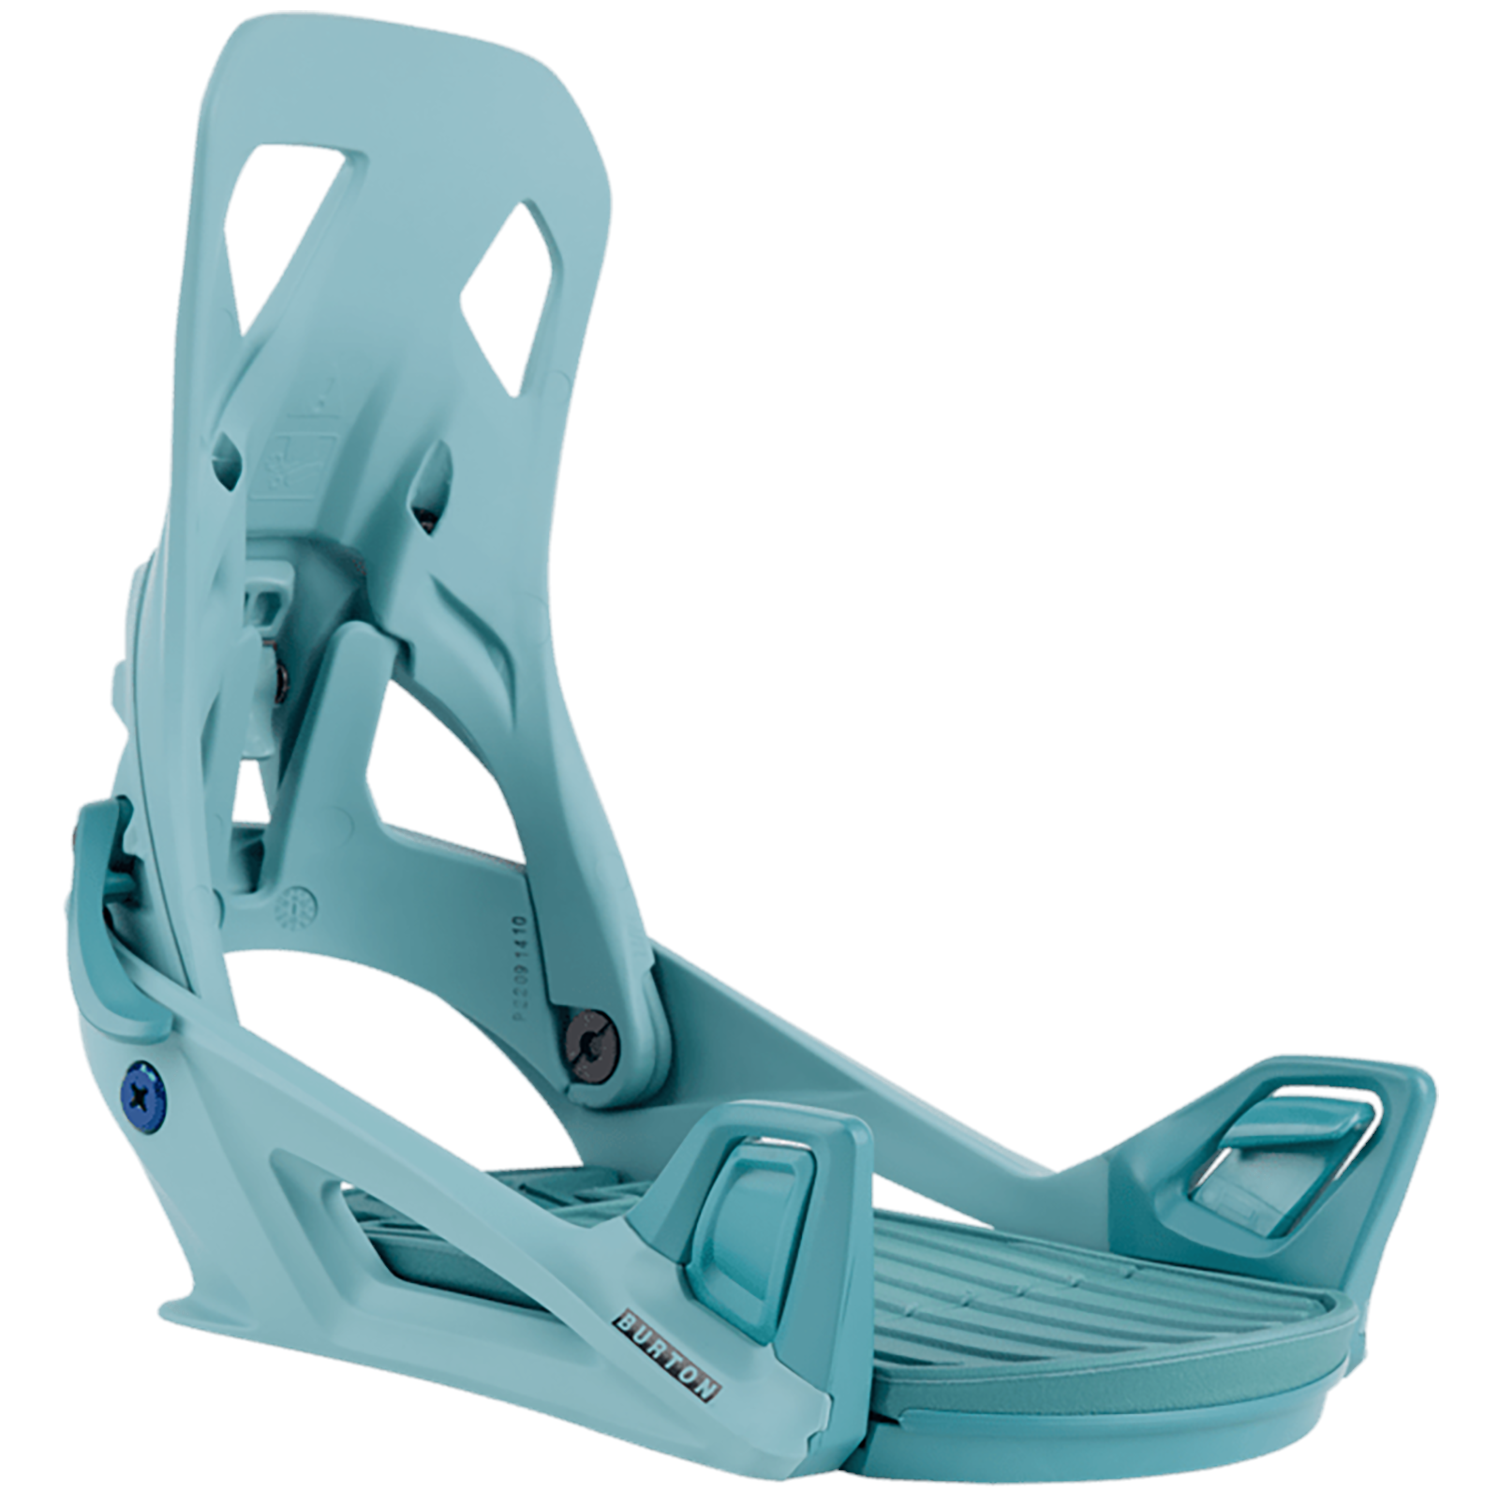 Burton Step On Offers the Ultimate Boot and Binding Performance – PSIA-AASI